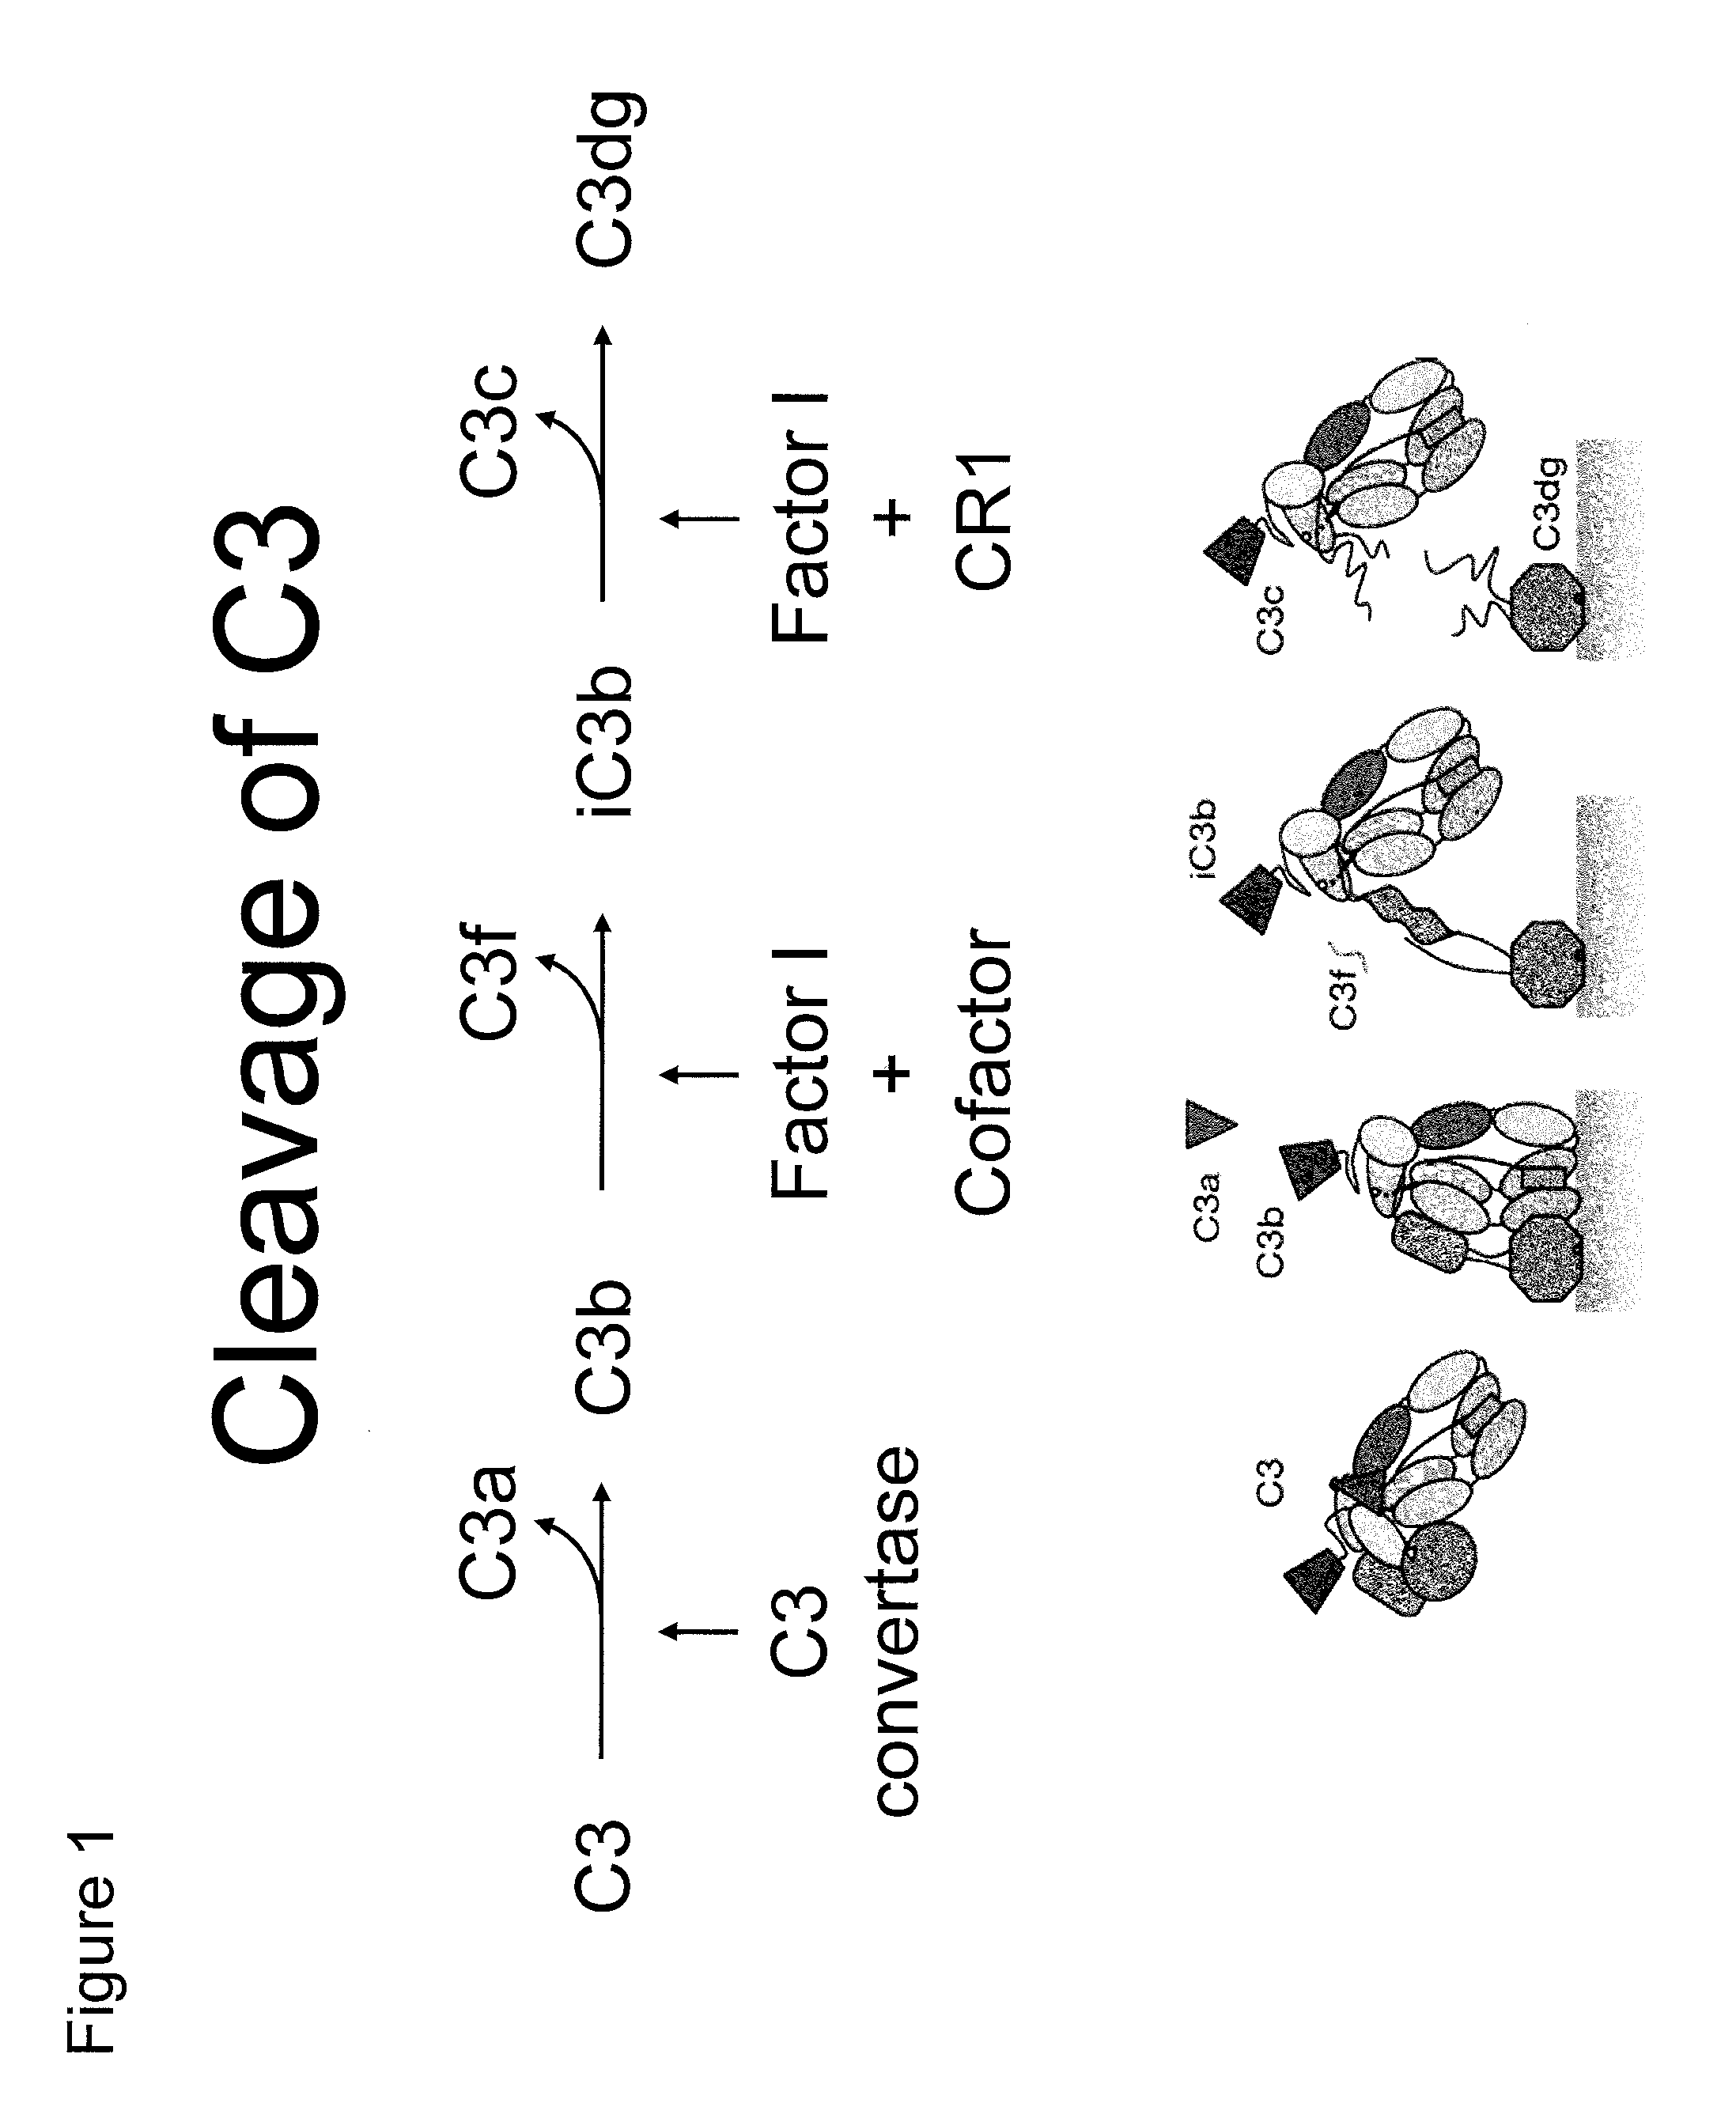 Antibodies to the c3d fragment of complement component 3